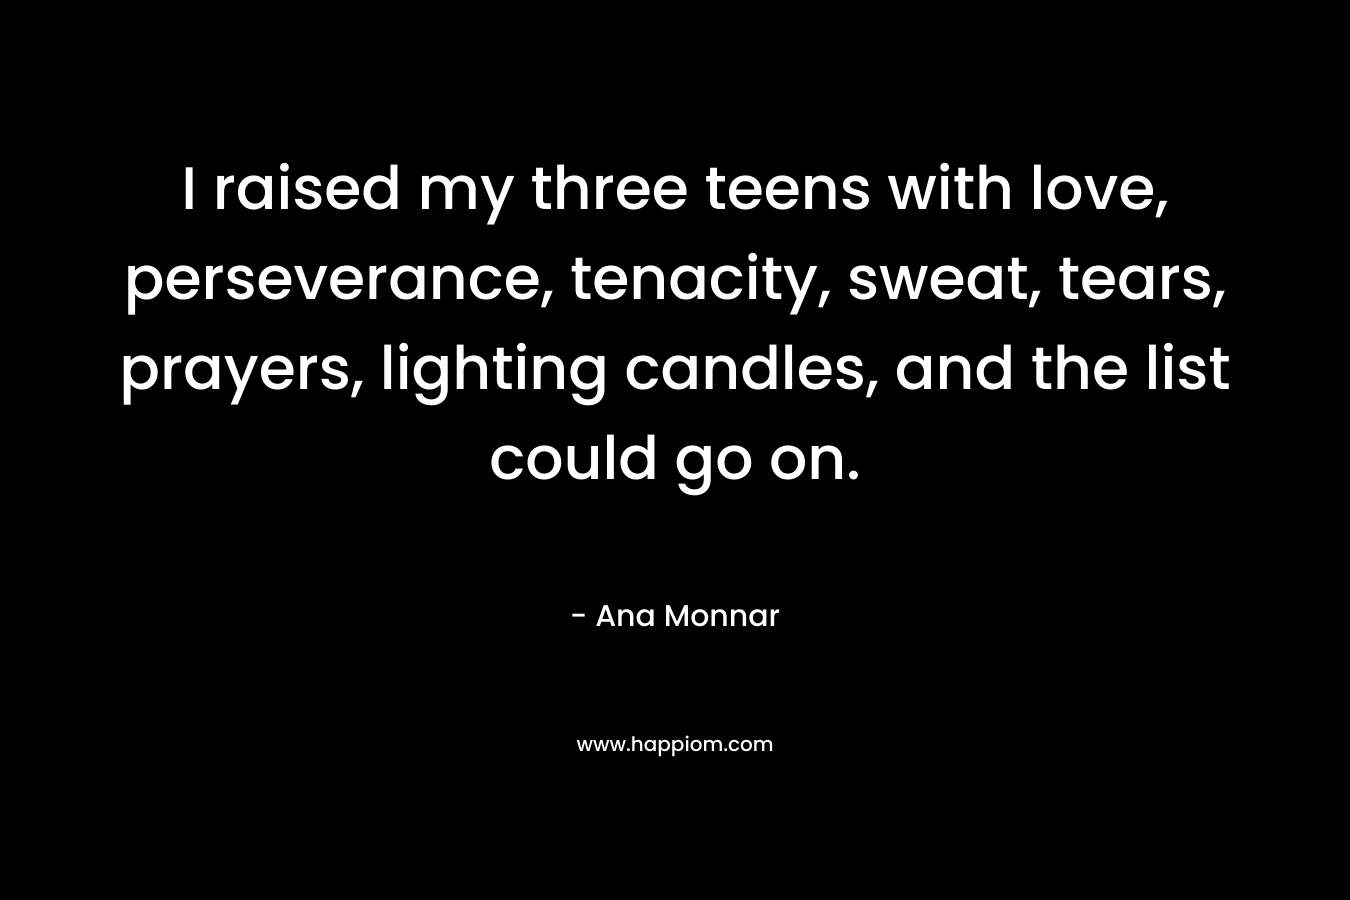 I raised my three teens with love, perseverance, tenacity, sweat, tears, prayers, lighting candles, and the list could go on.